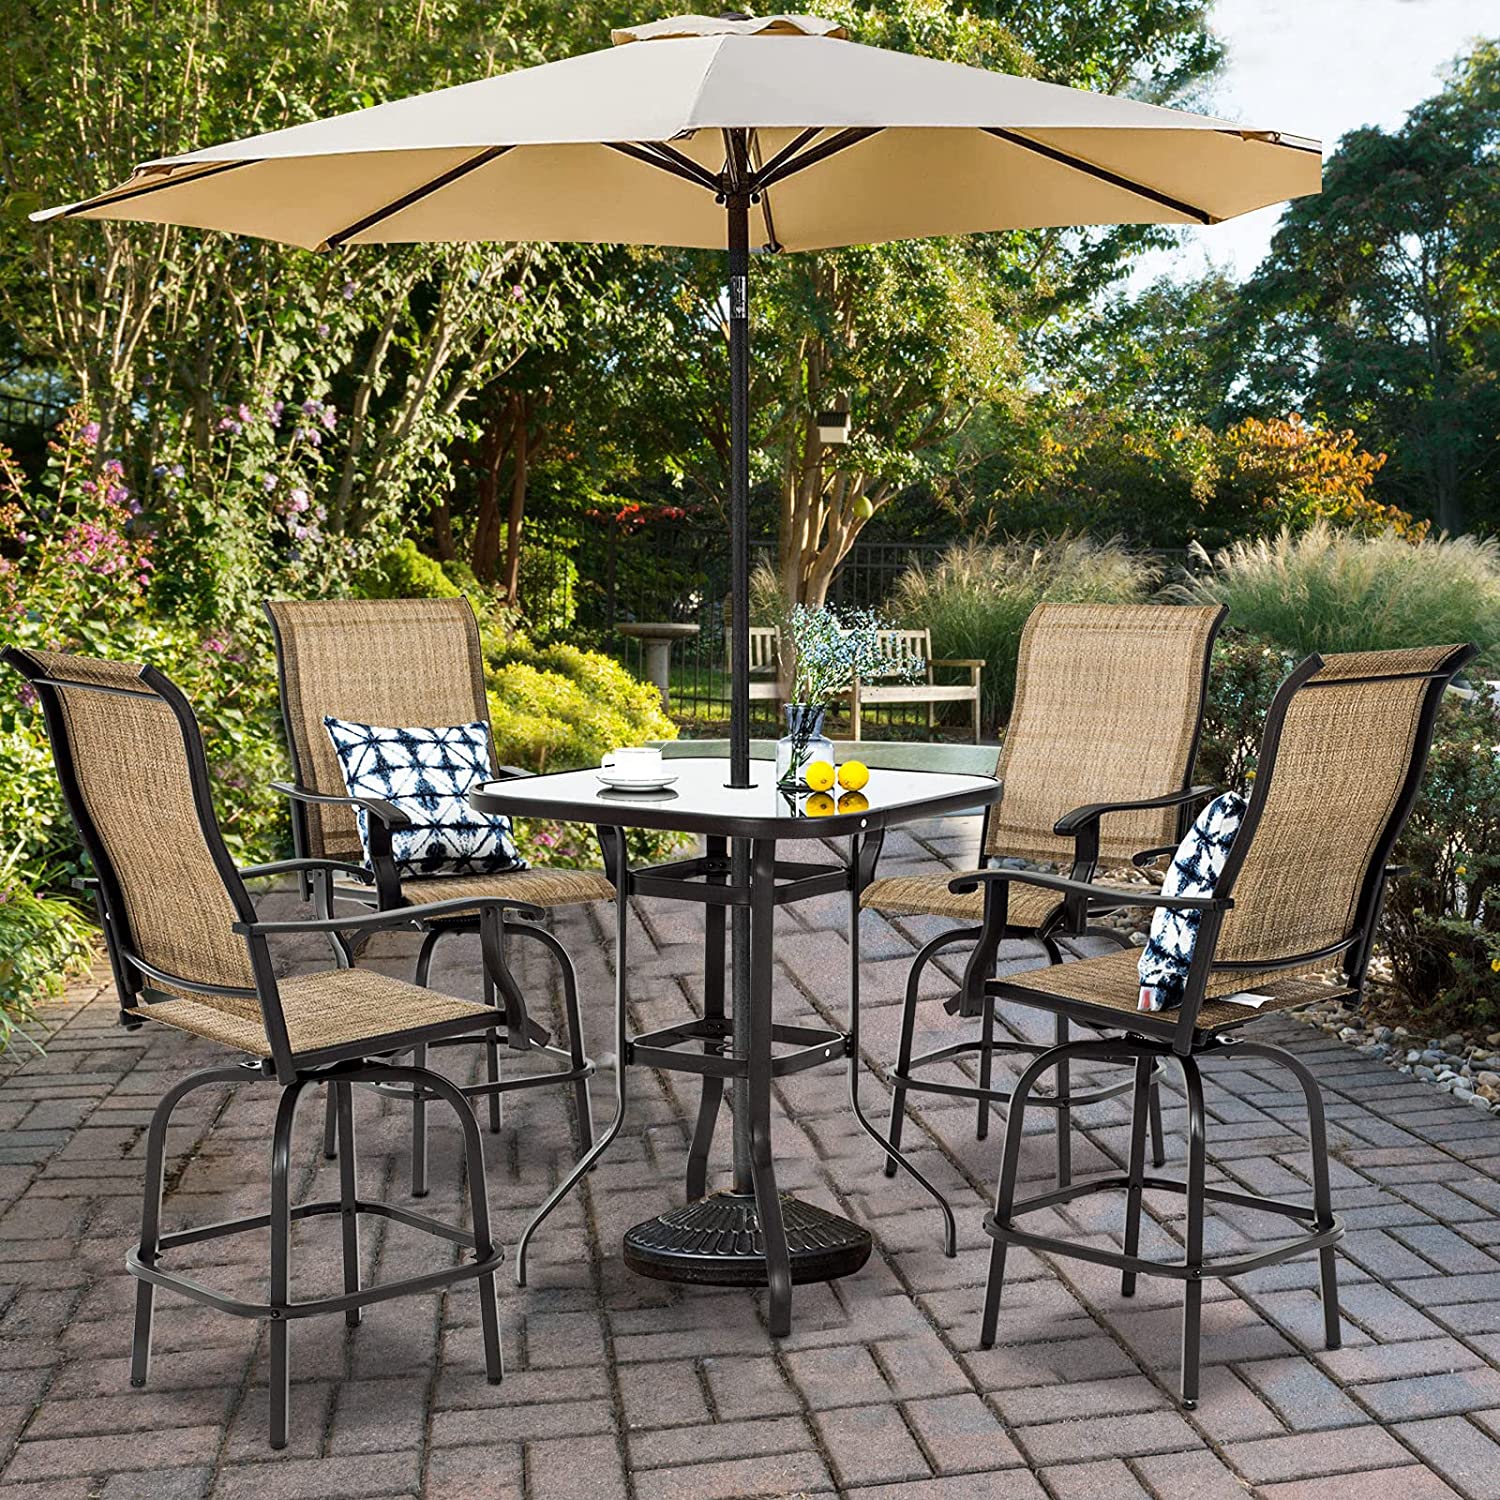 Outdoor Patio Swivel Bar Sets, BTMWAY 3 Piece Bar Height Bistro Set with Glass Top Dining Table and 2 Swivel Bar Stools, All-weather Fabric High Top Conversation Set for Backyard Balcony Front Porch - image 3 of 18